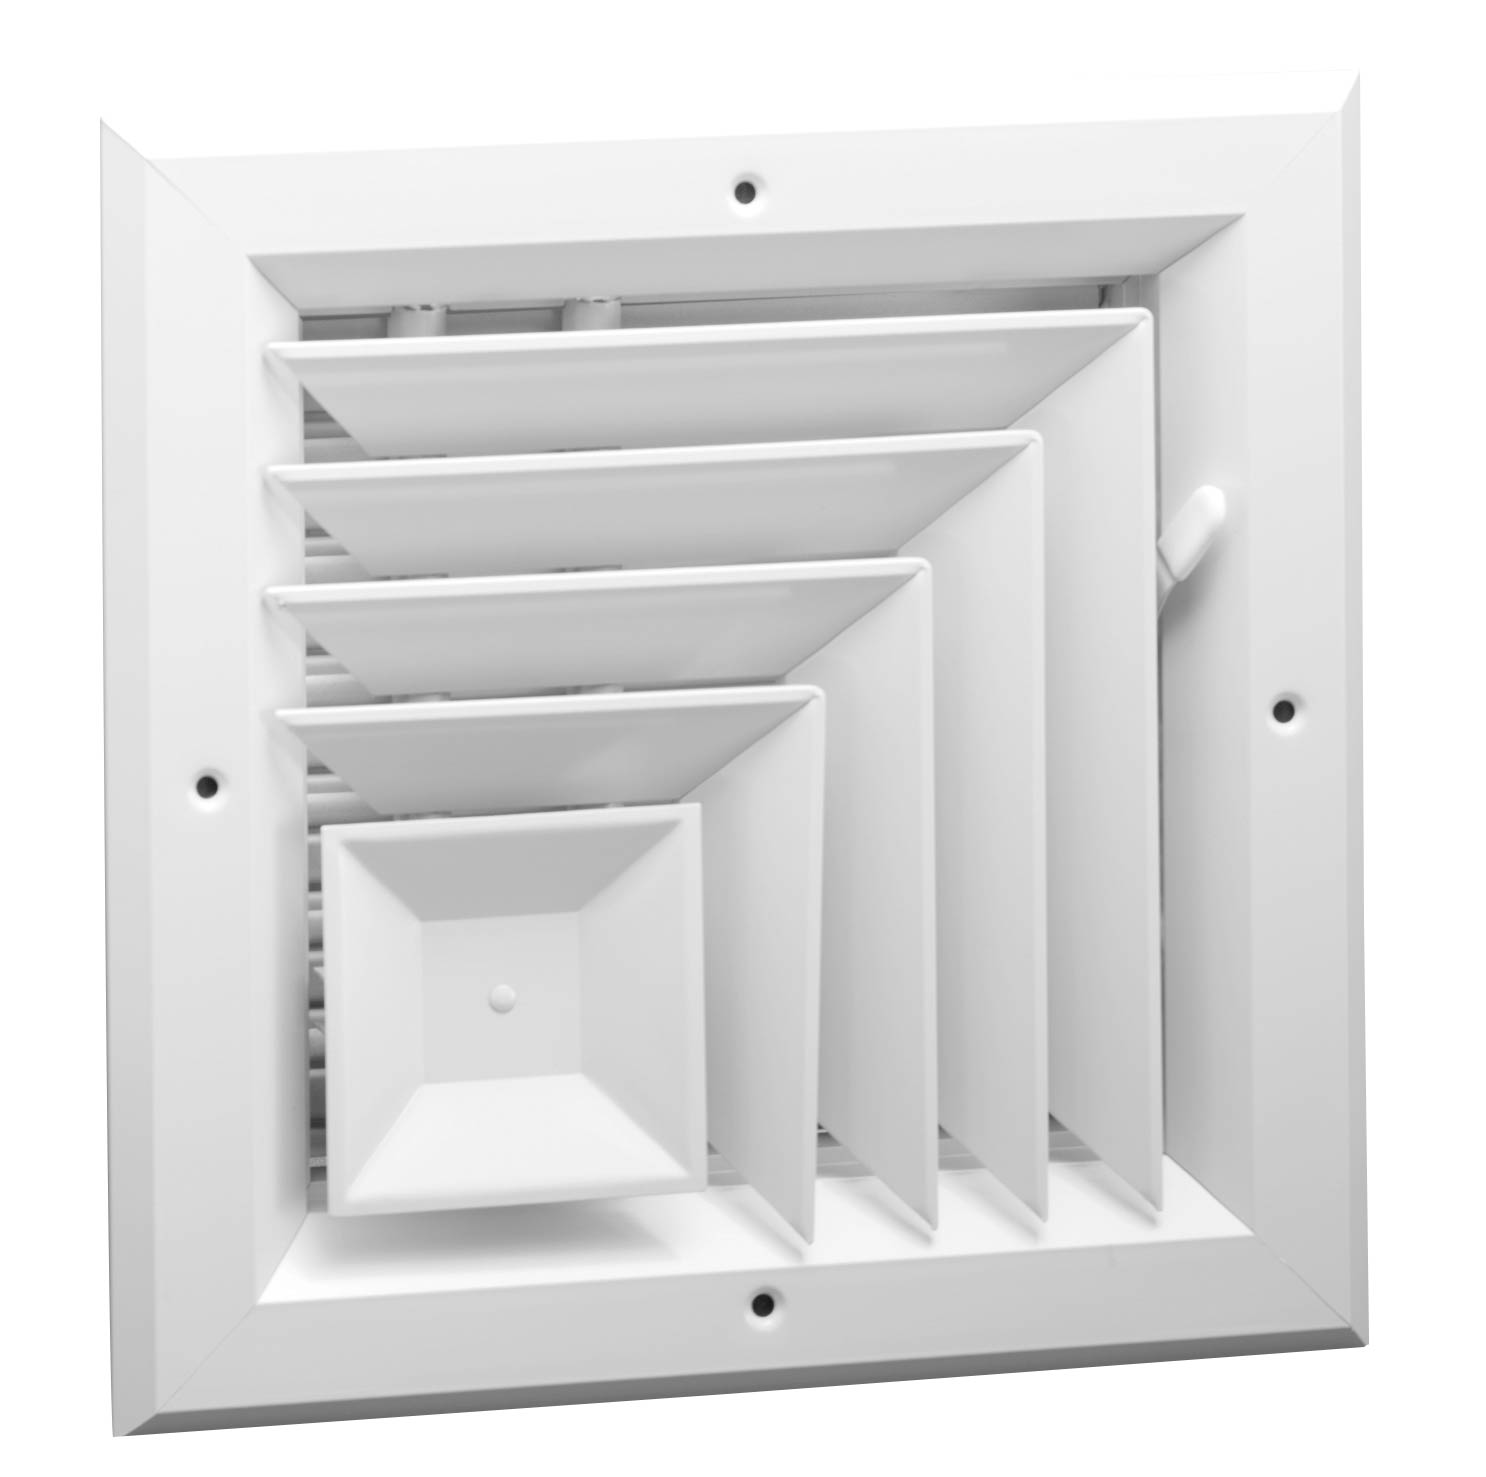 A1005 Series Two Way Corner, Square Ceiling Diffuser